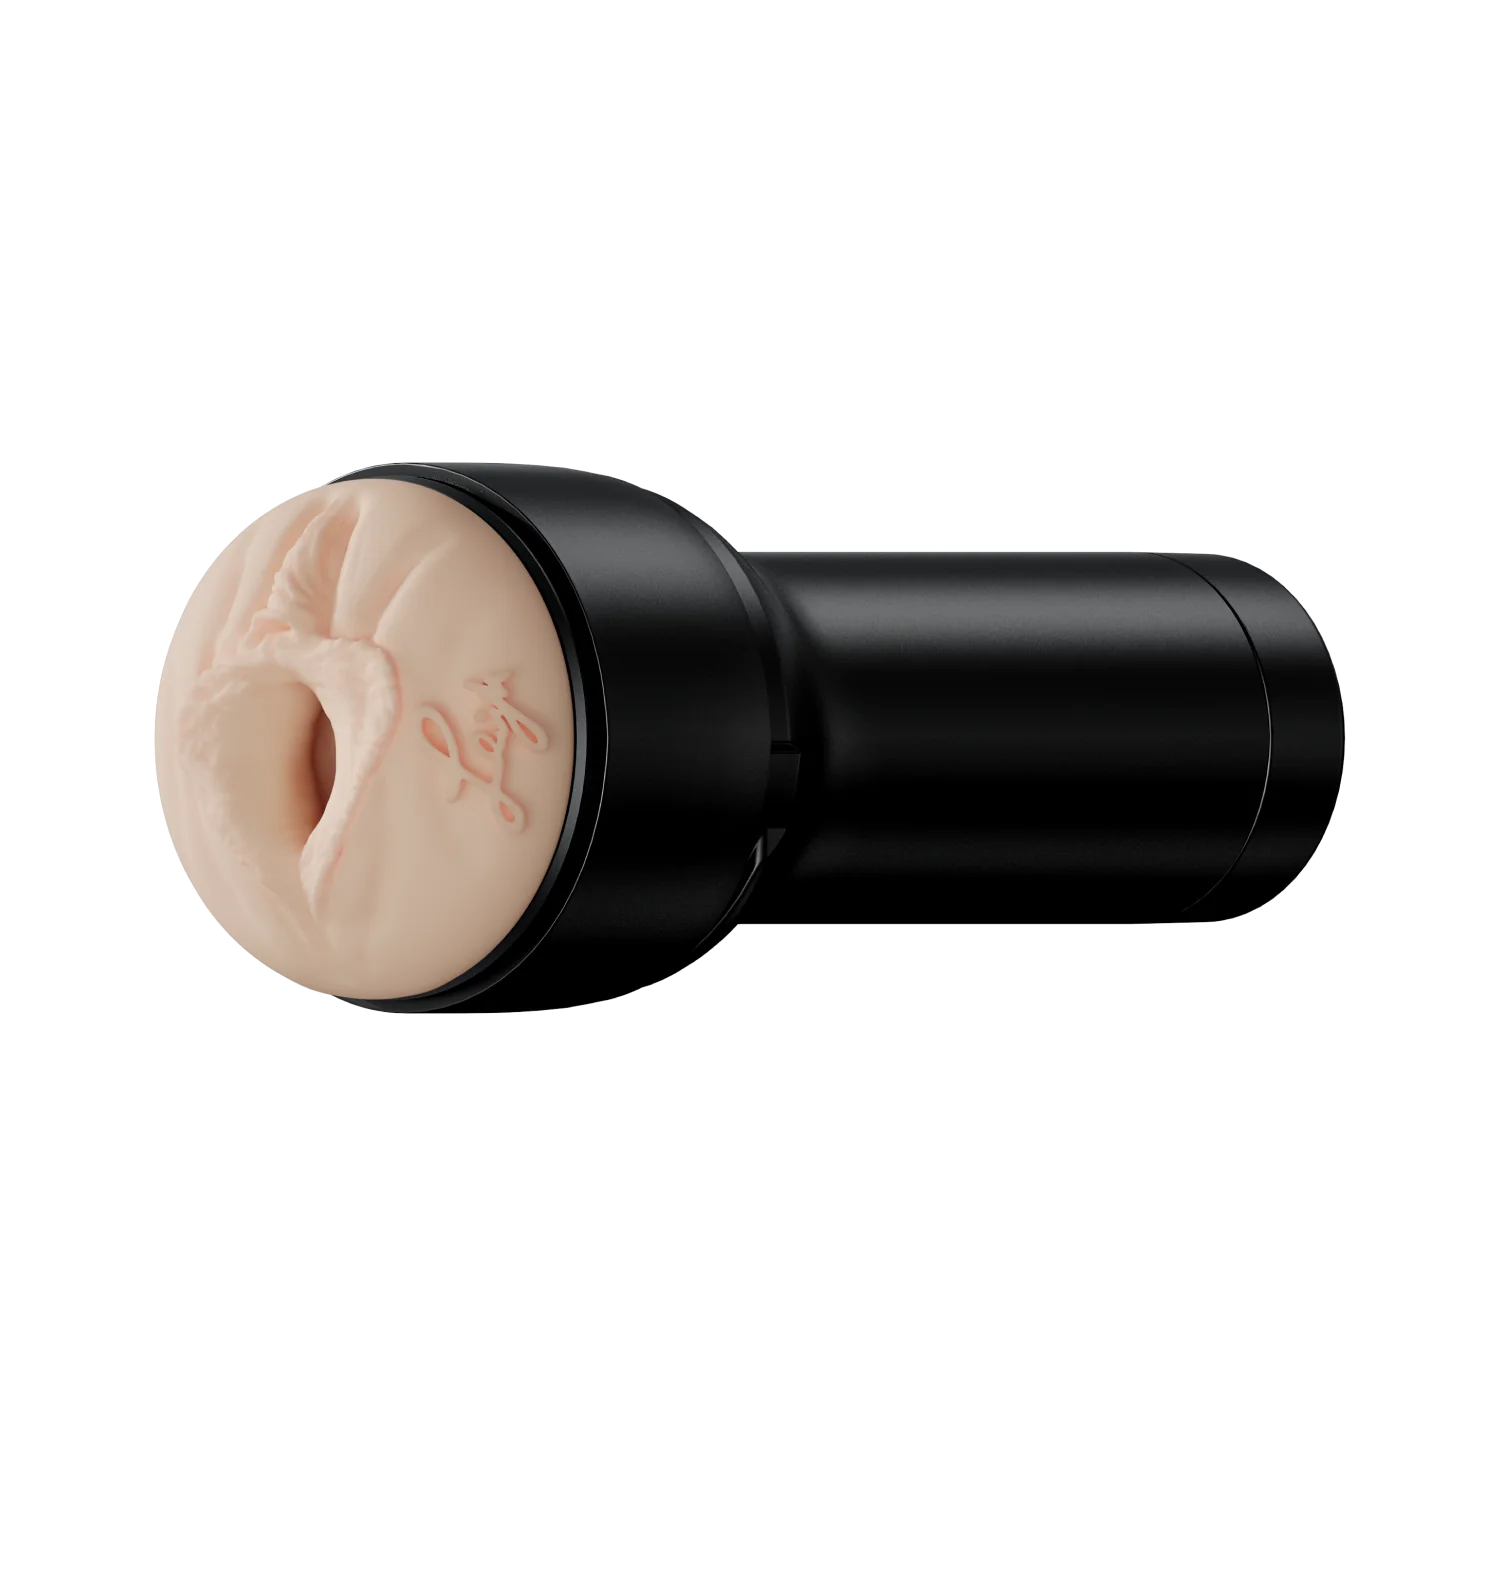 Side angle view of the stroker showing its lifelike vulva. 